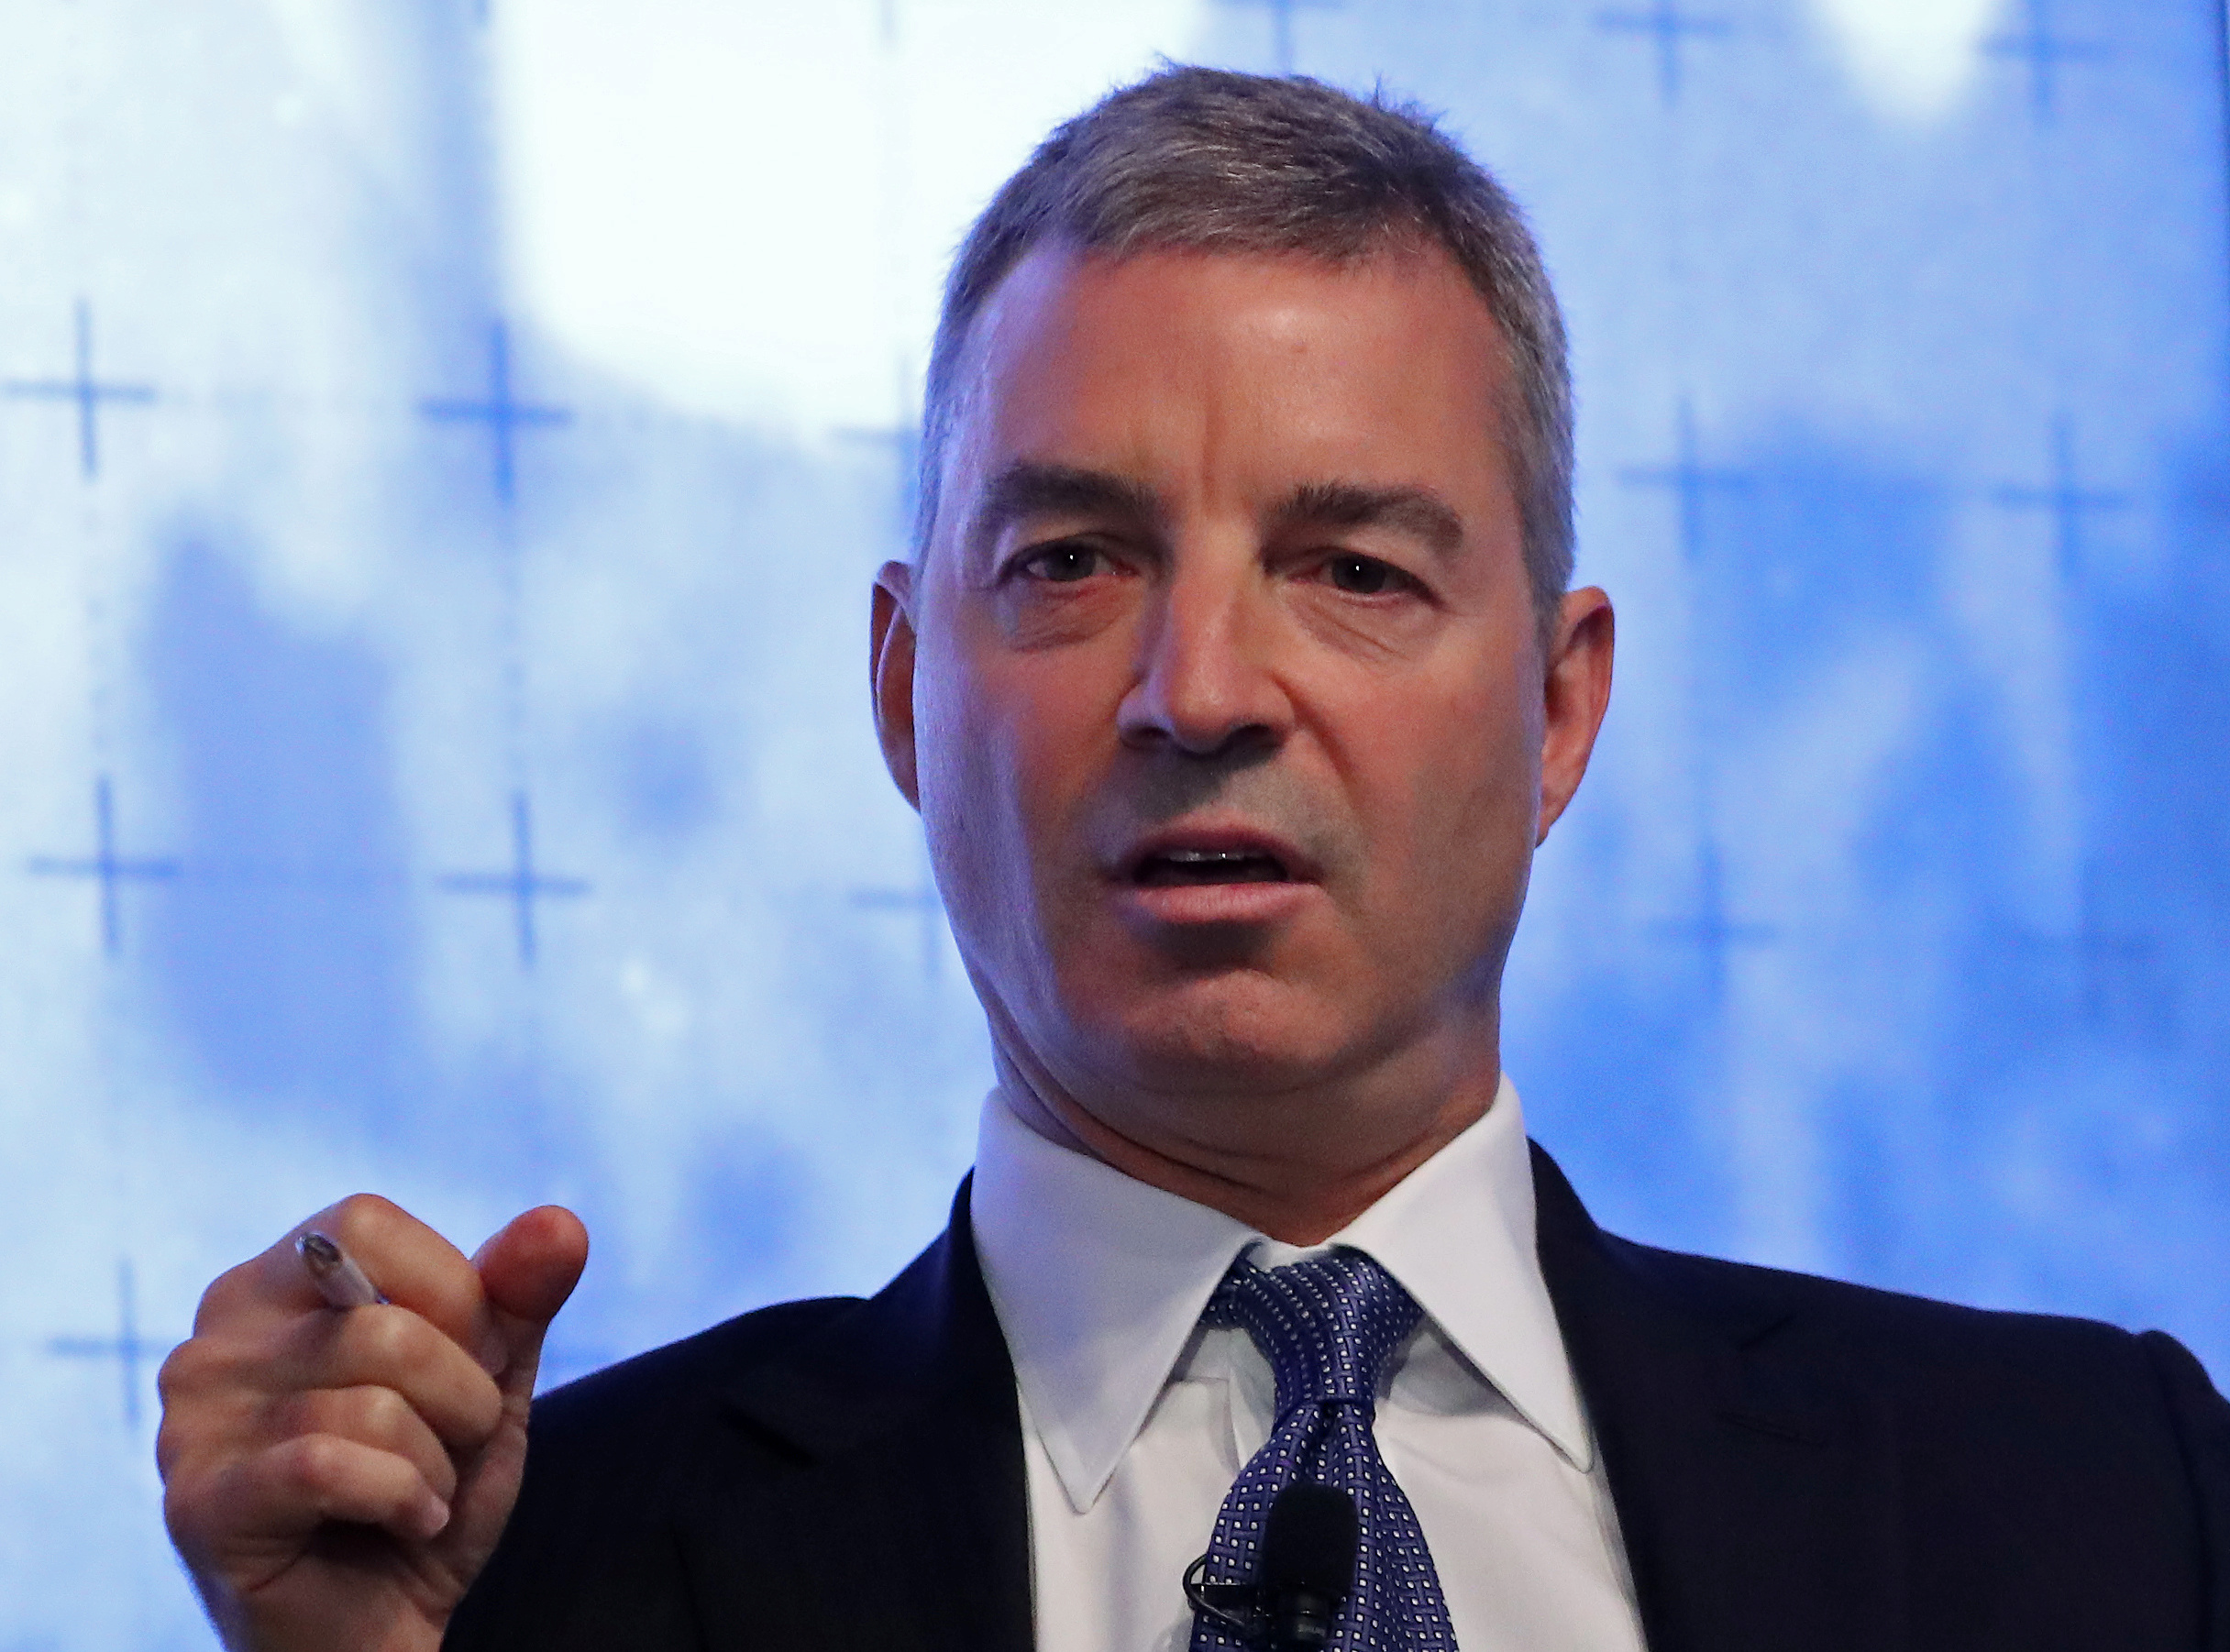 Hedge fund manager Daniel Loeb speaks during a Reuters Newsmaker event in New York